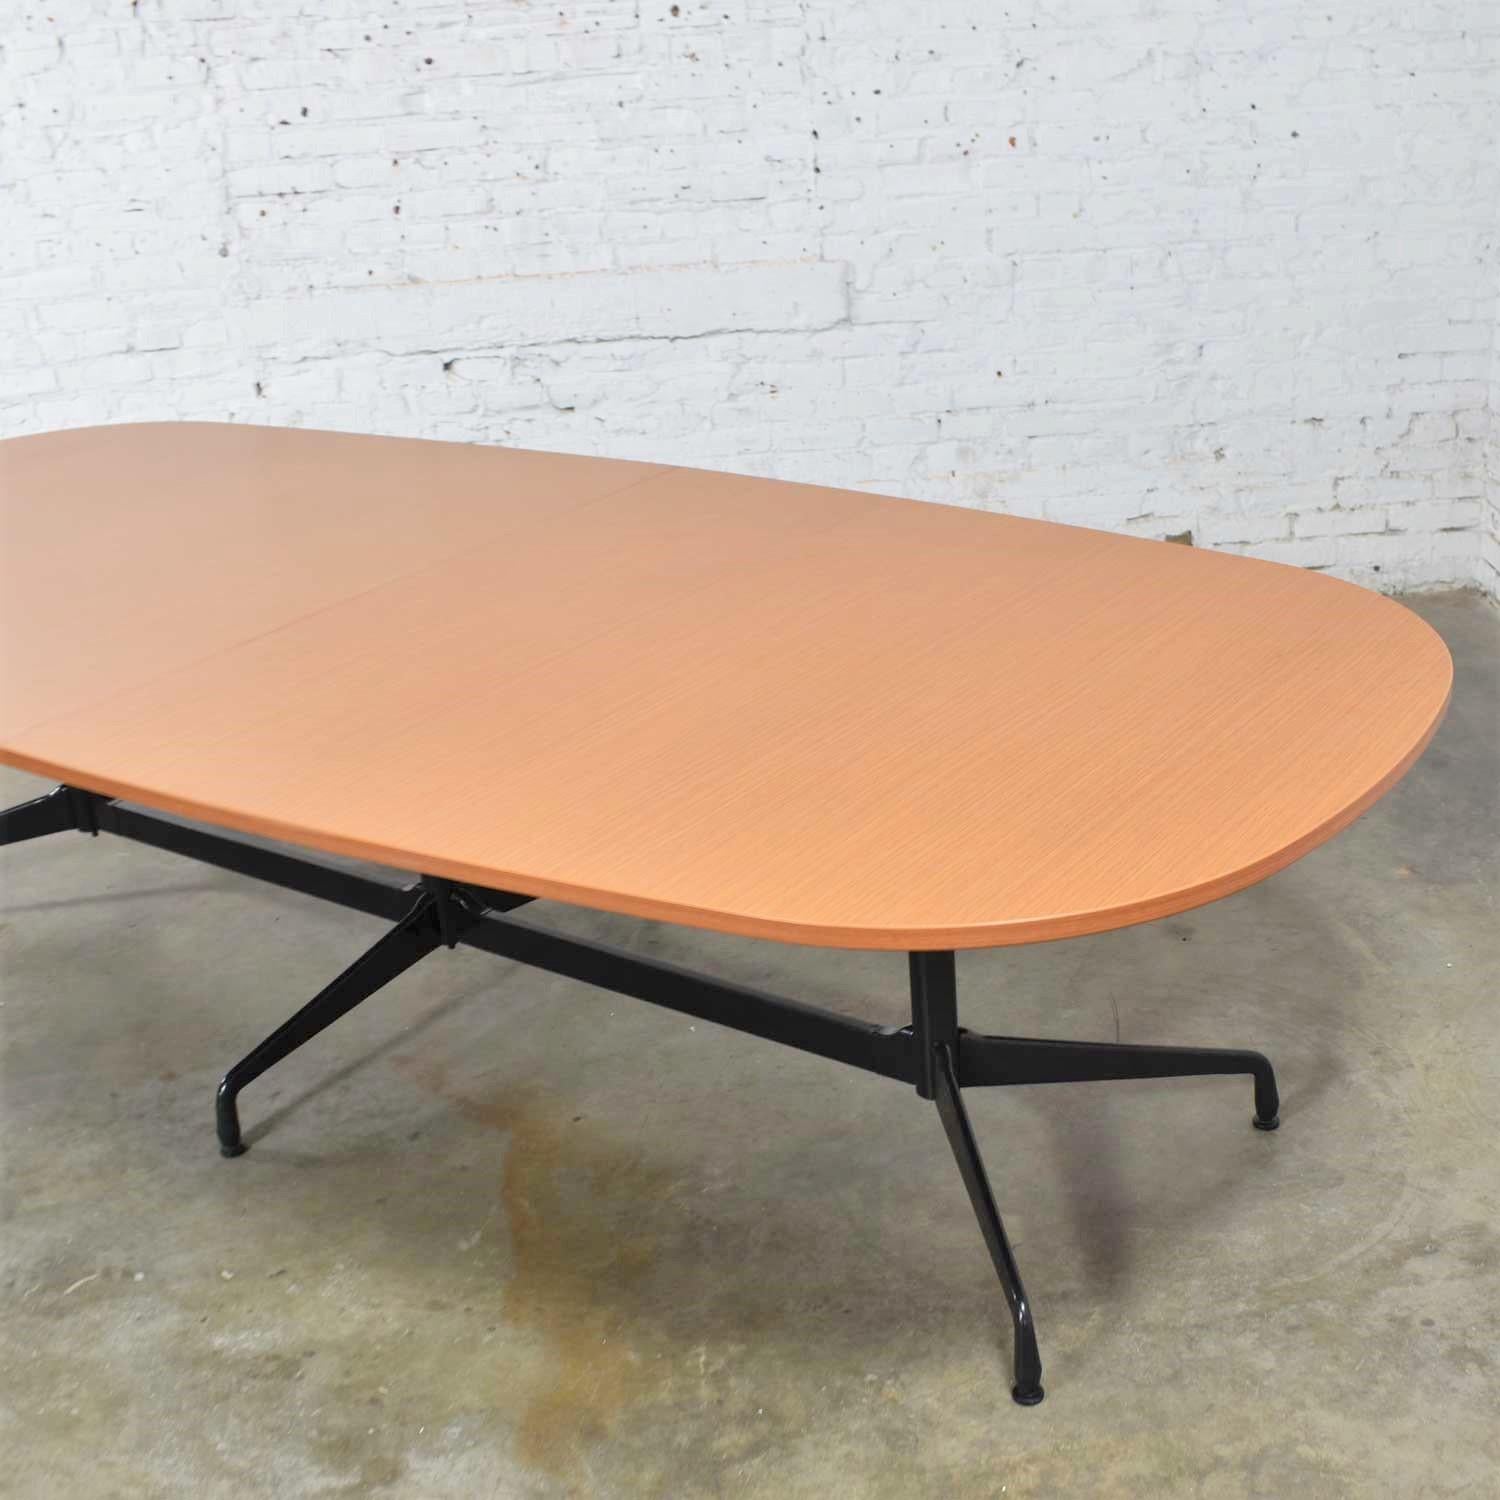 20th Century Extra Long Segmented Base Elliptical Table by Eames for Herman Miller